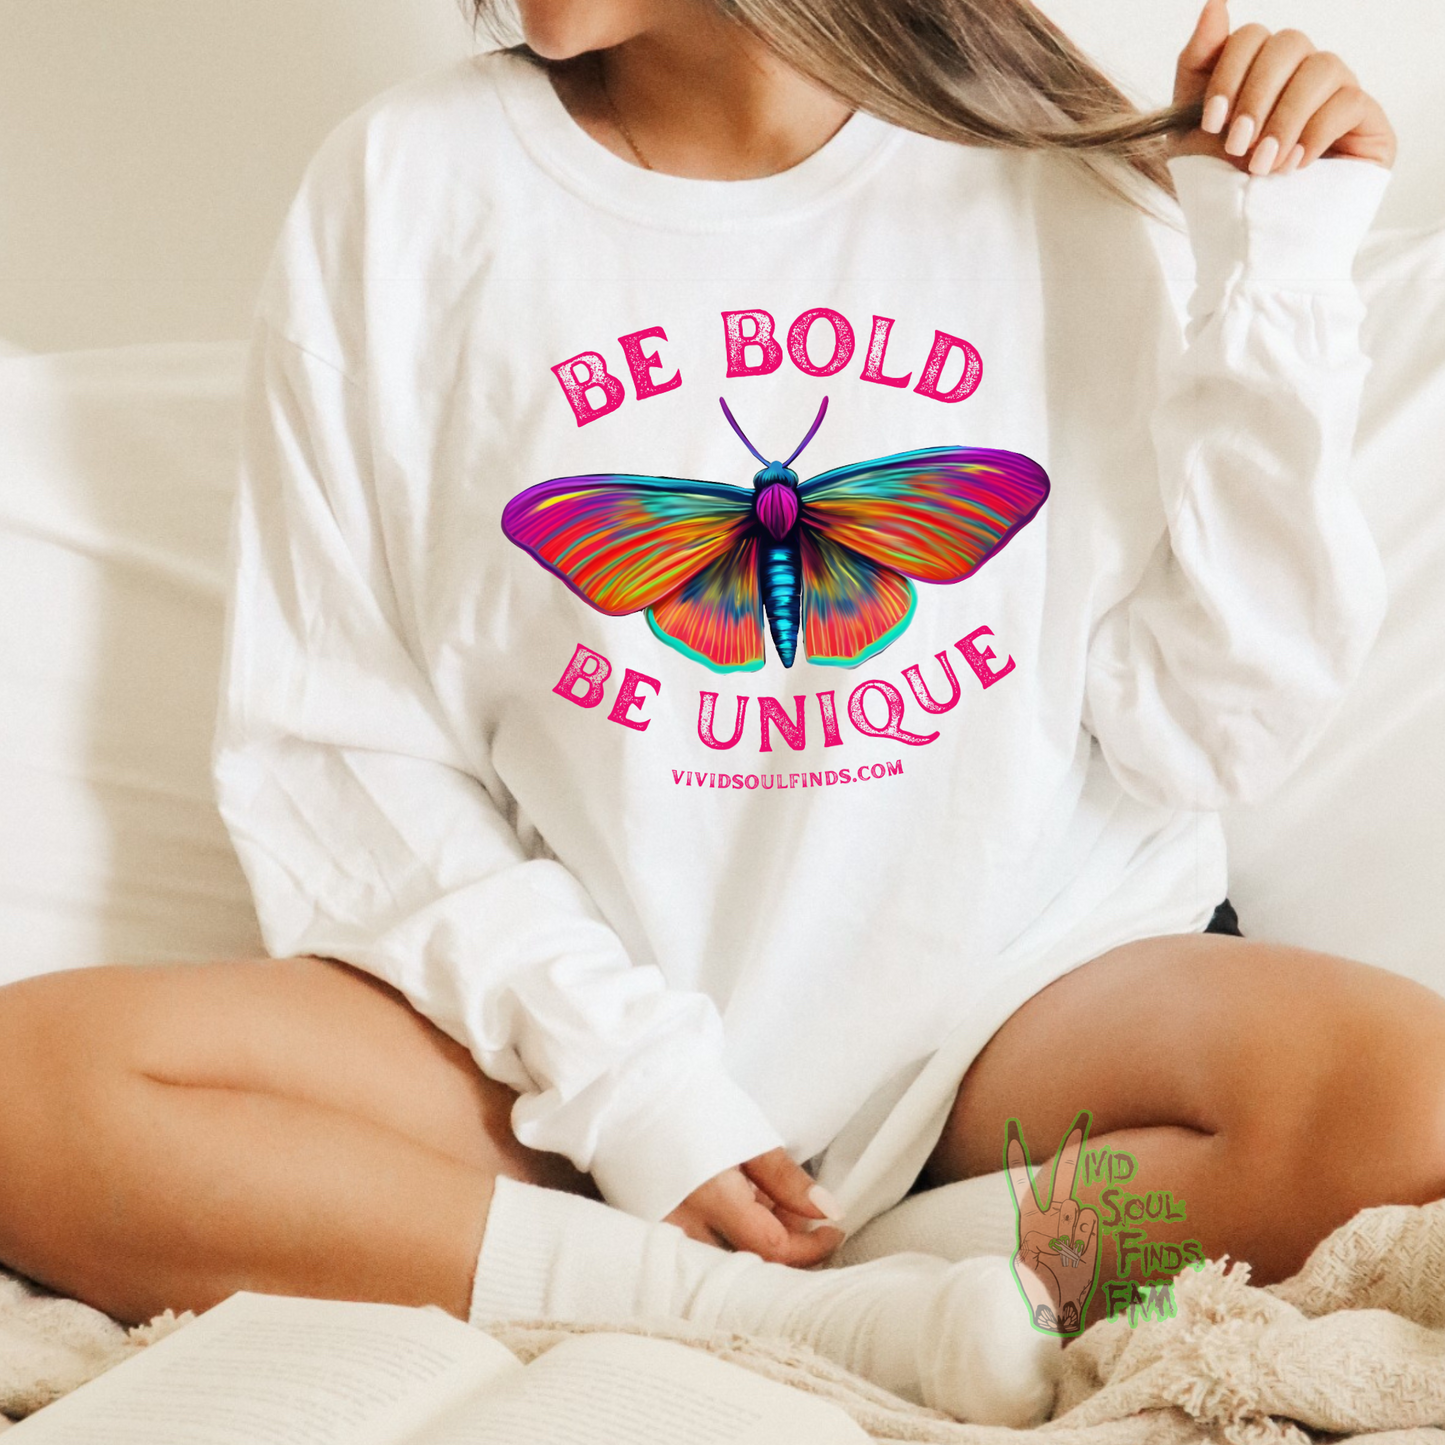 Be Bold EXCLUSIVE VSF Long Sleeve